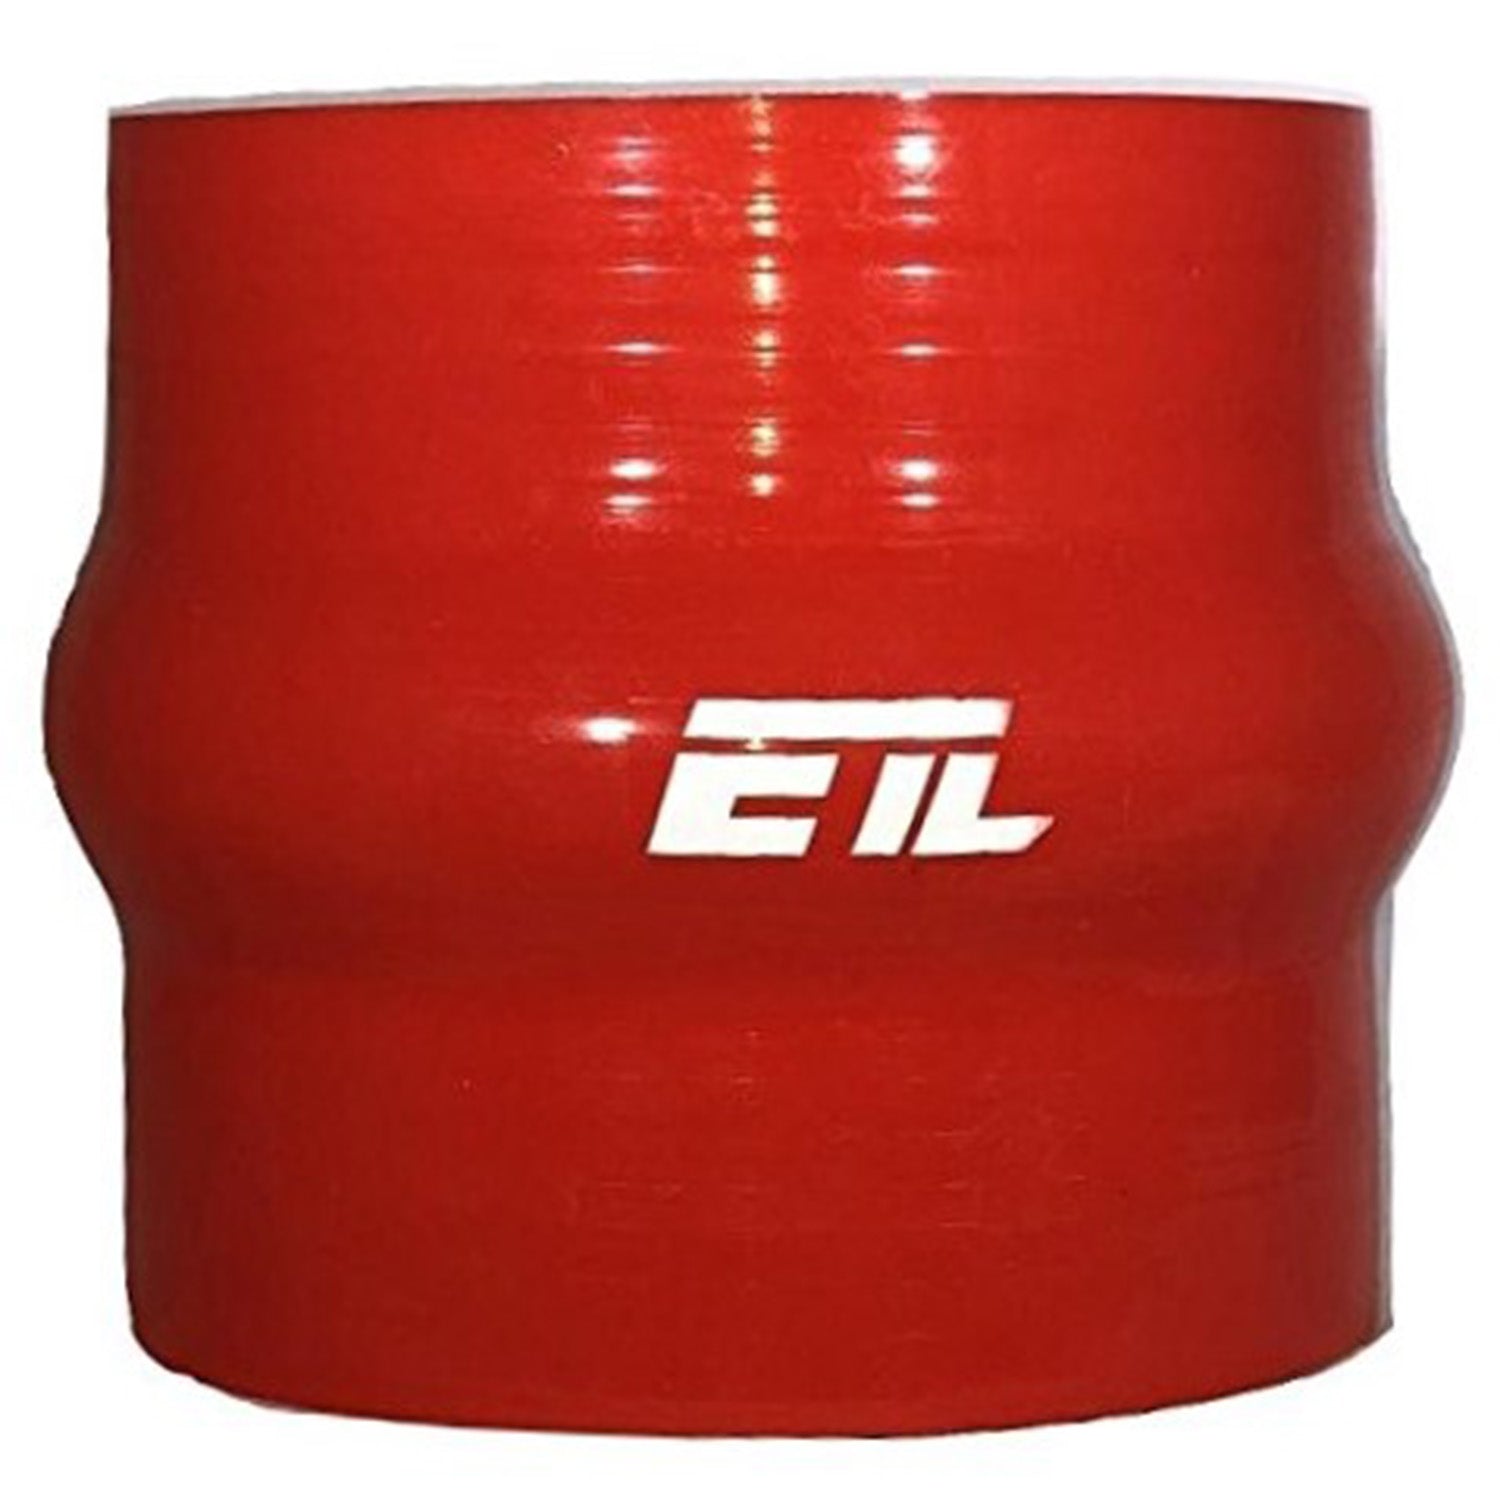 ETL Performance 233025 Silicone Hump Hose 2.25 Inch Diameter 3.00 Inch Red